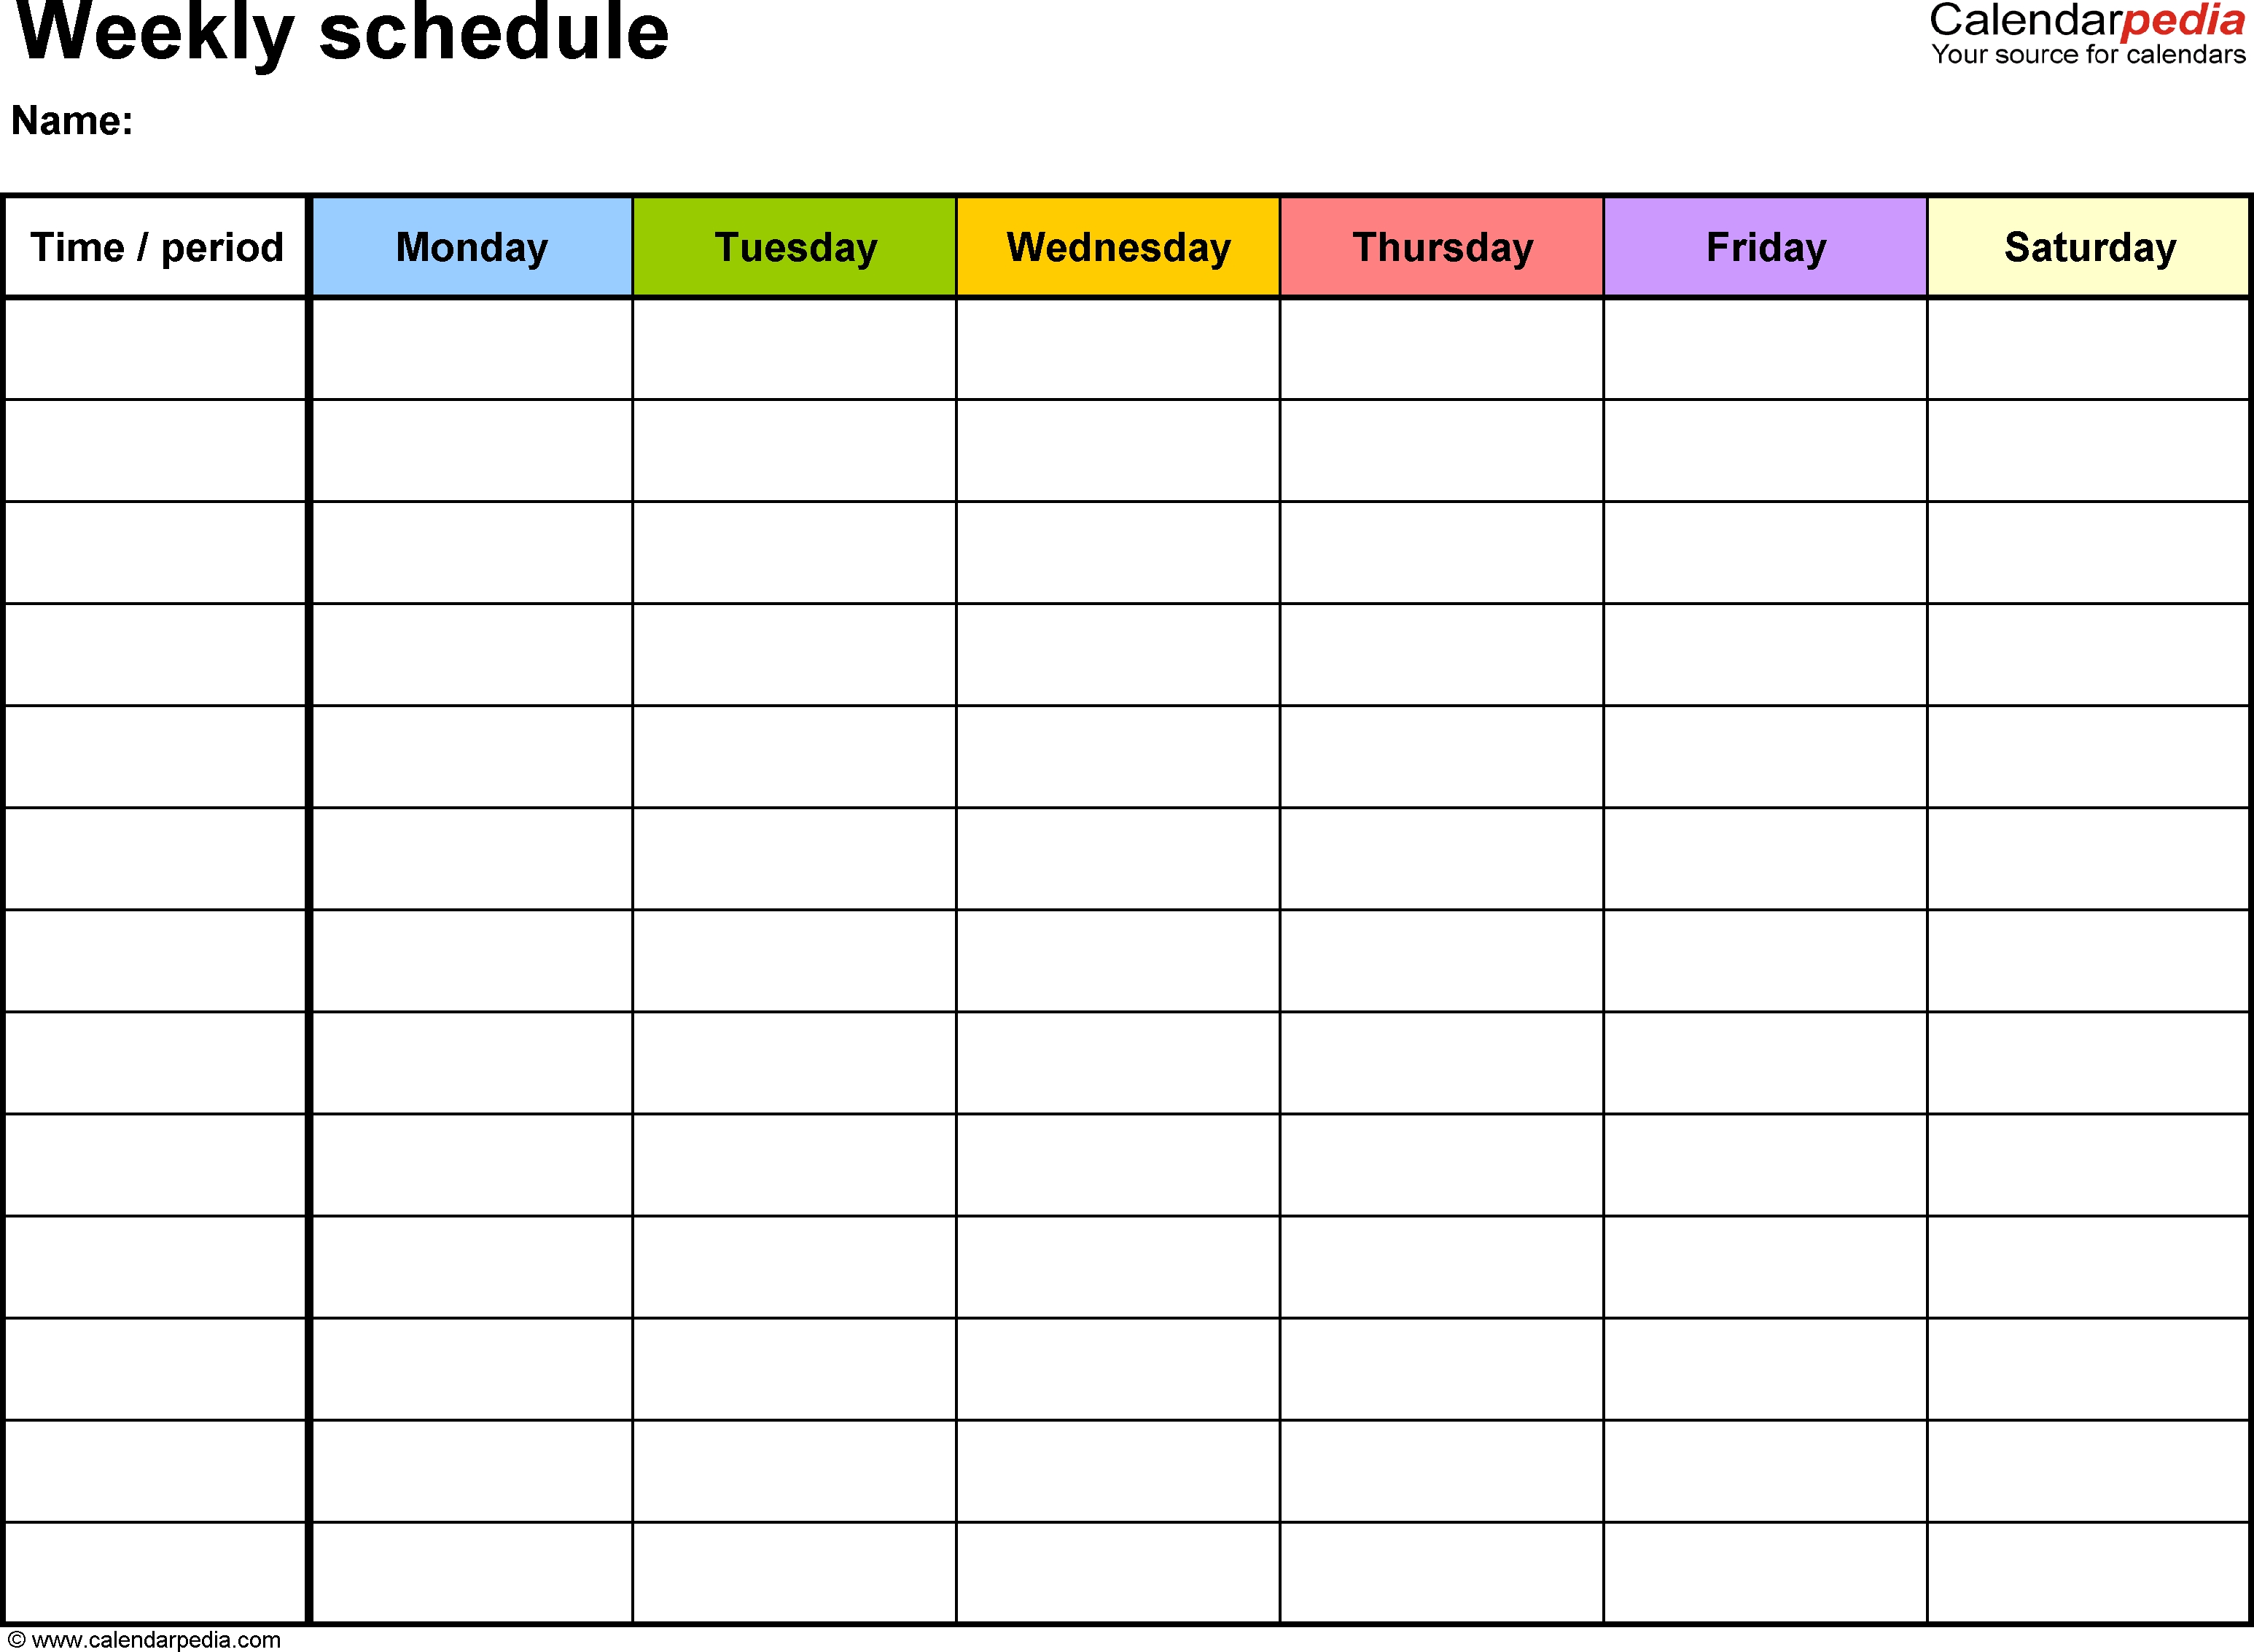 Free Weekly Schedule Templates For Word - 18 Templates  Free Weekly Bill Payment Template